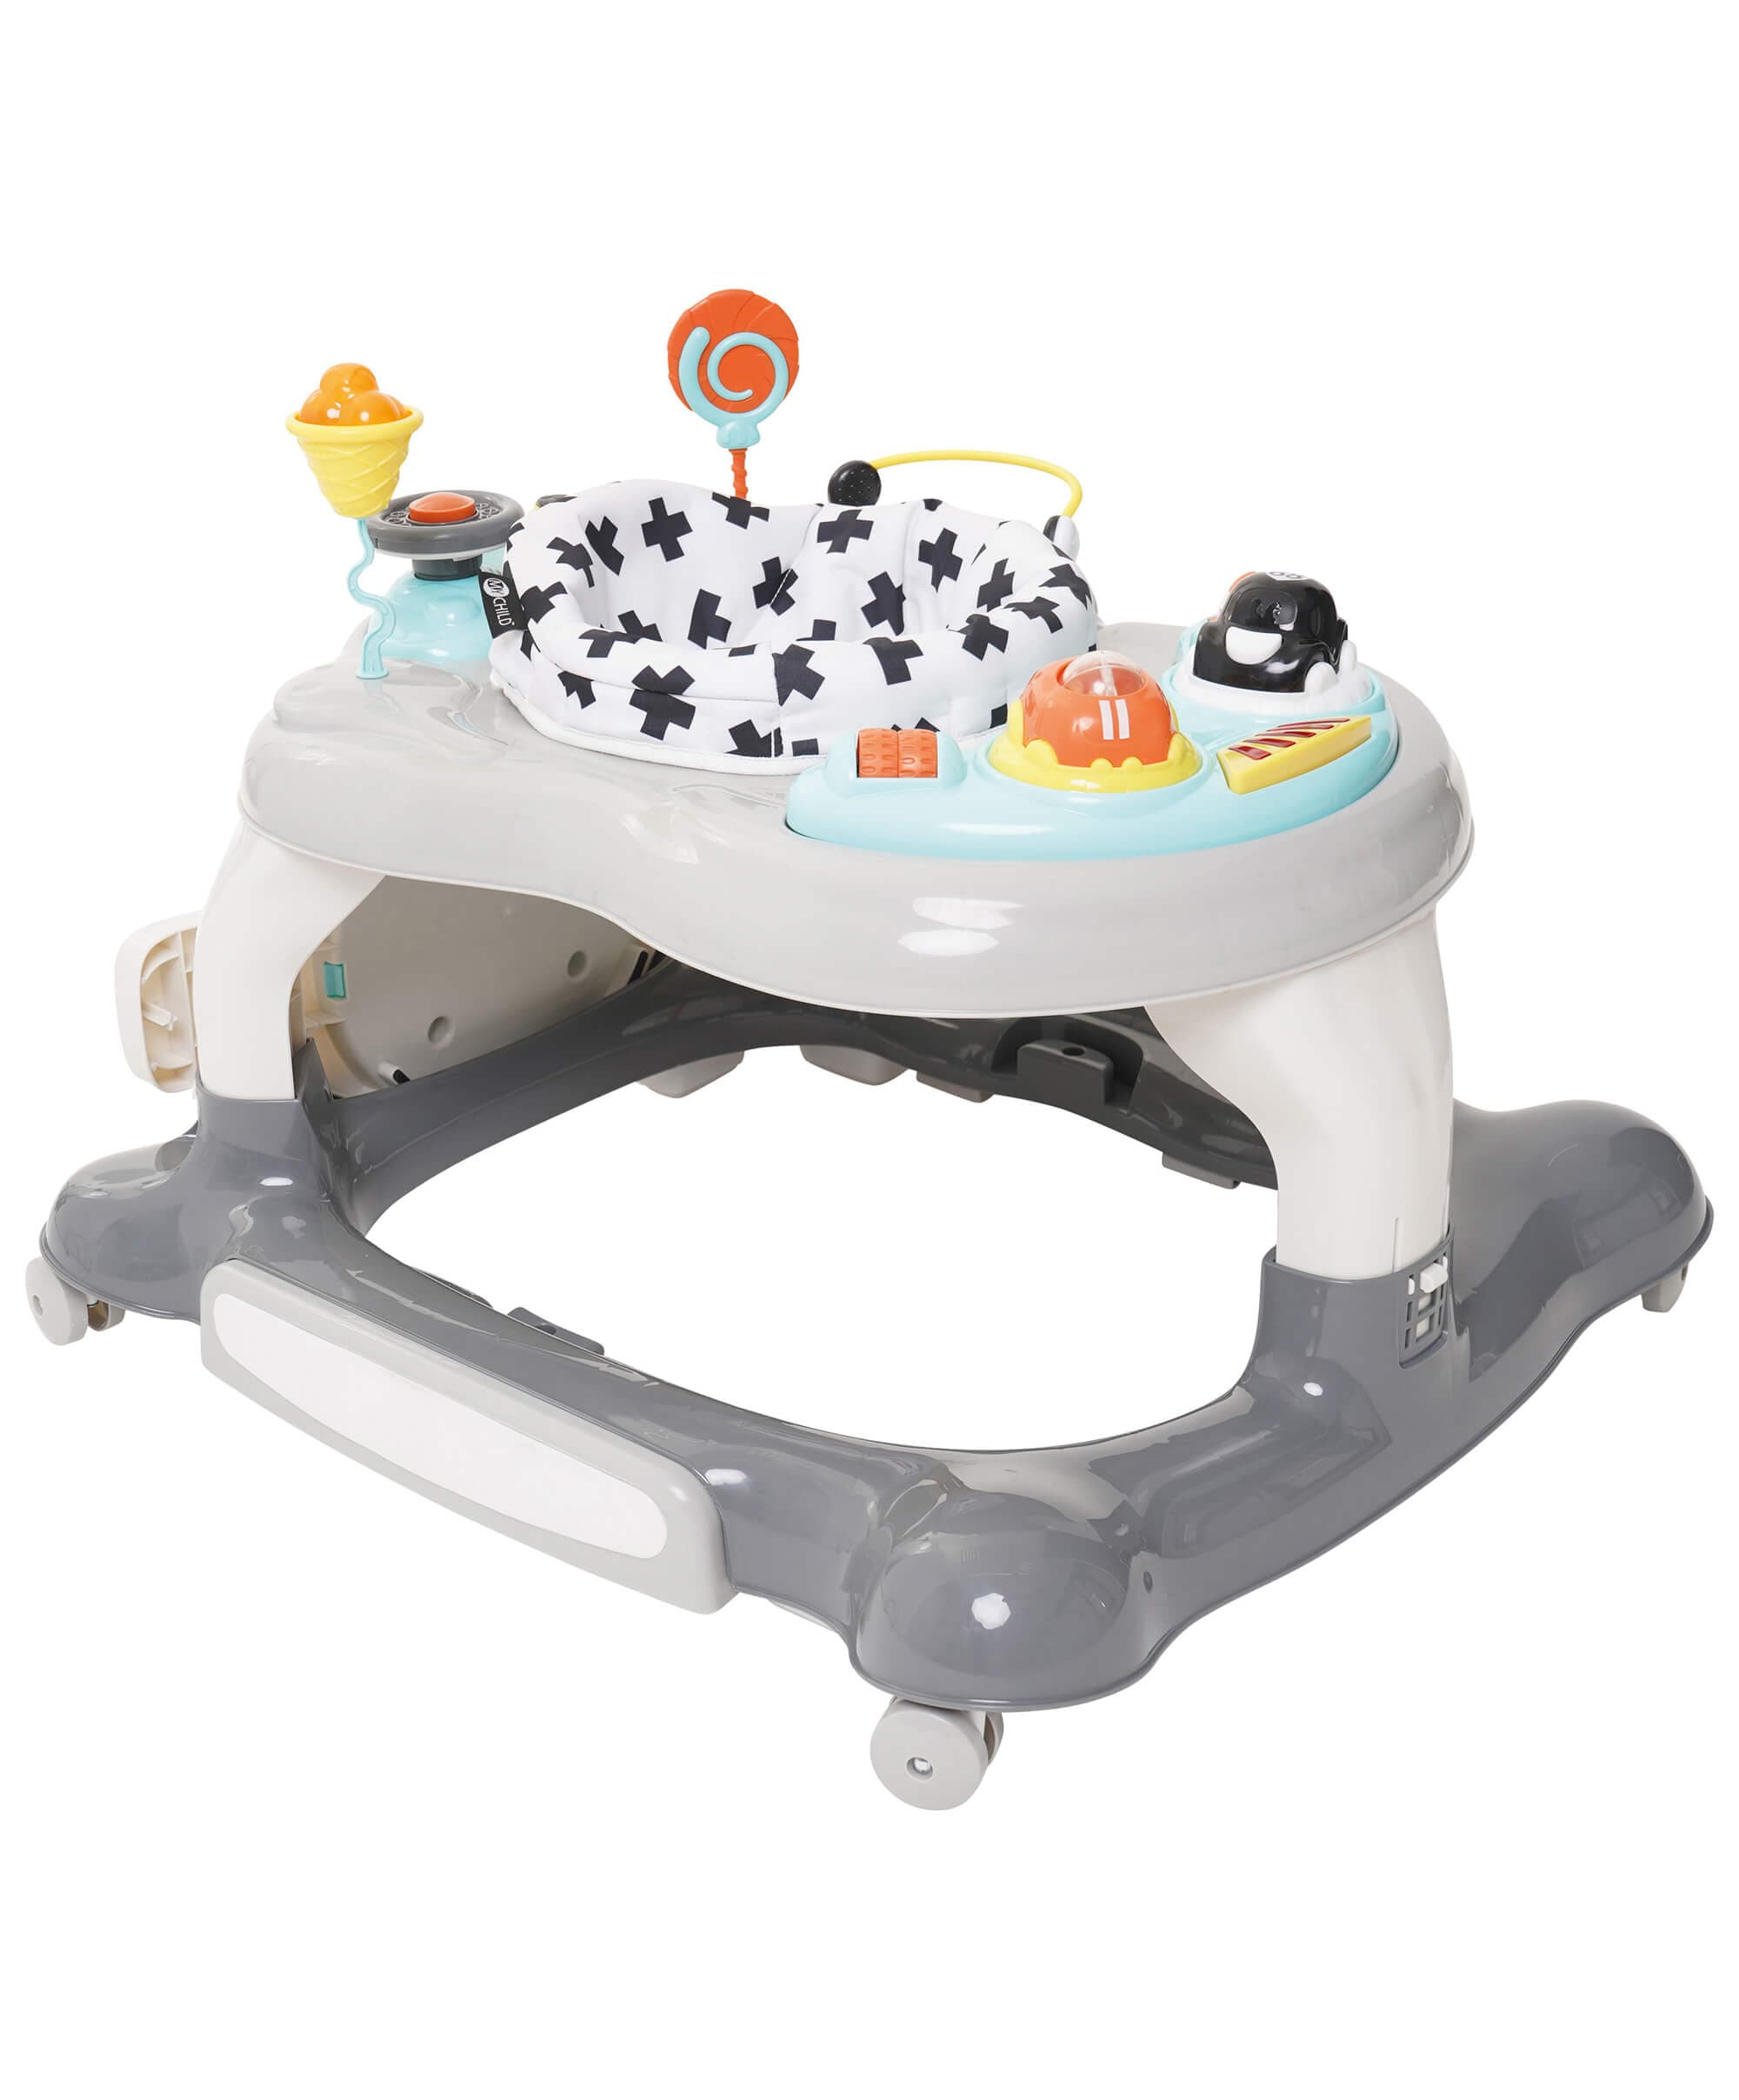 MyChild 4-in-1 Roundabout 4-in-1 Activity Walker